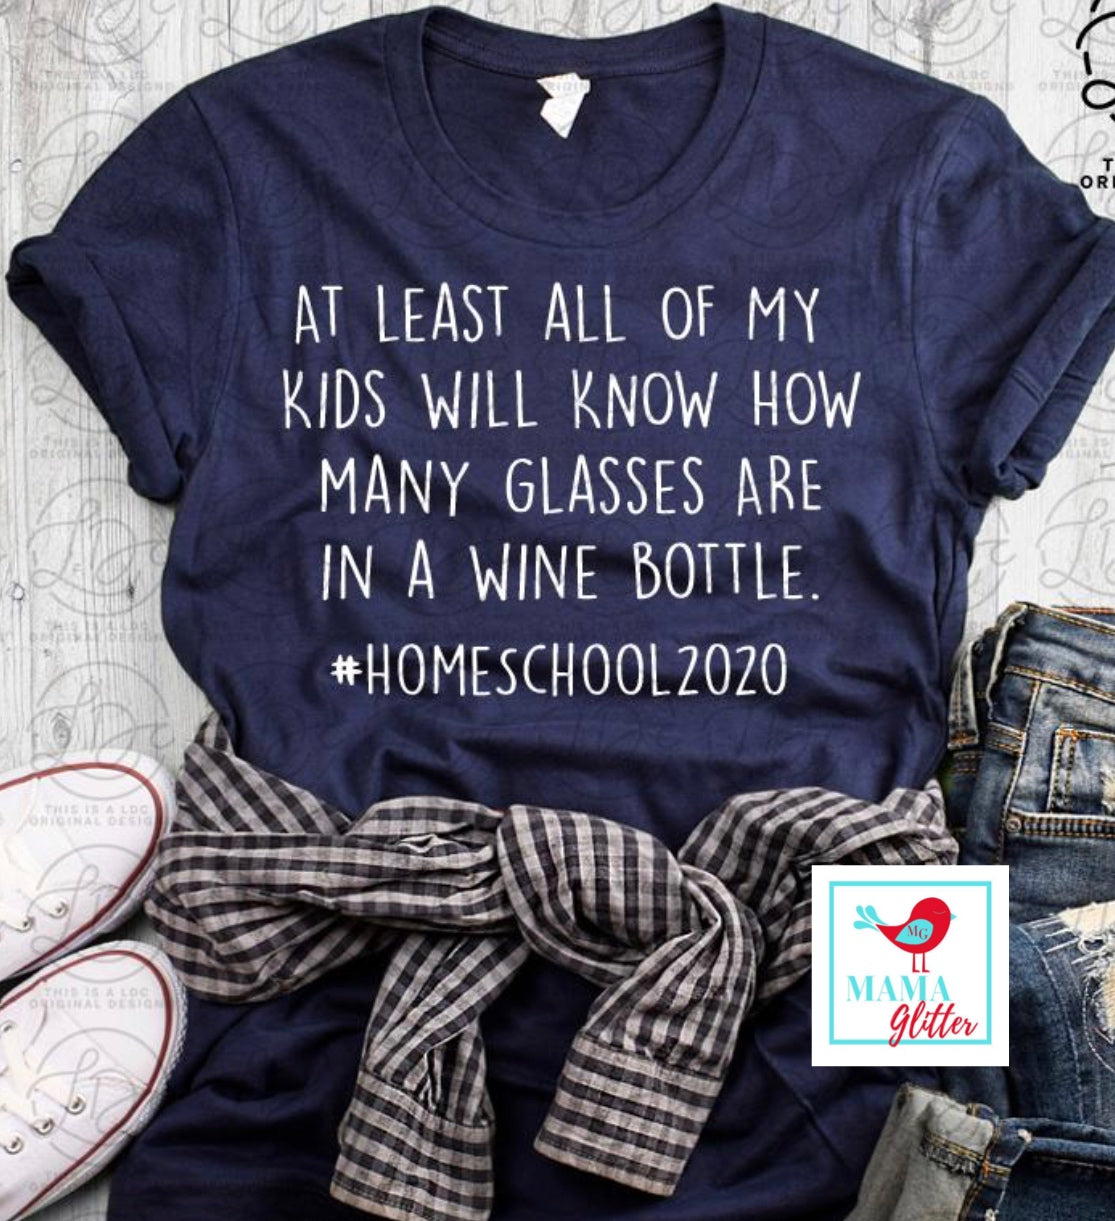 #Homeschool 2020-How Many Glasses Are In A Bottle Of Wine